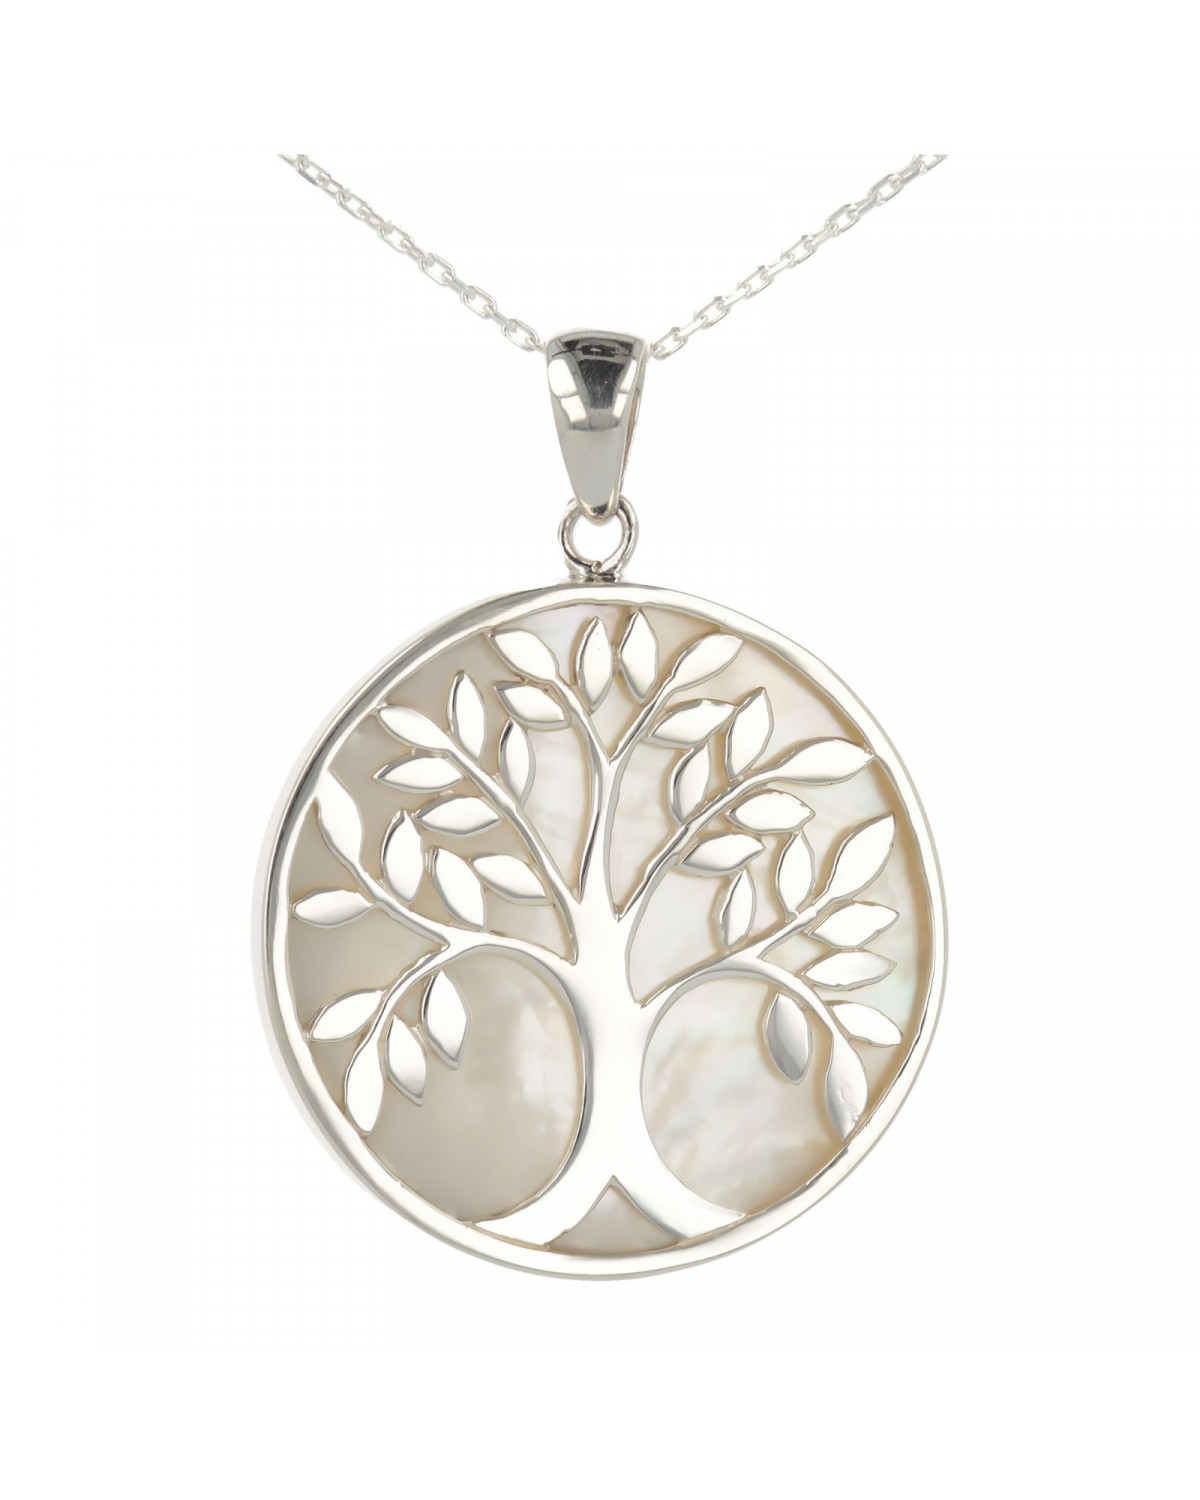 Details about   Round Mother of Pearl Ornate 925 Sterling Silver Pendant 